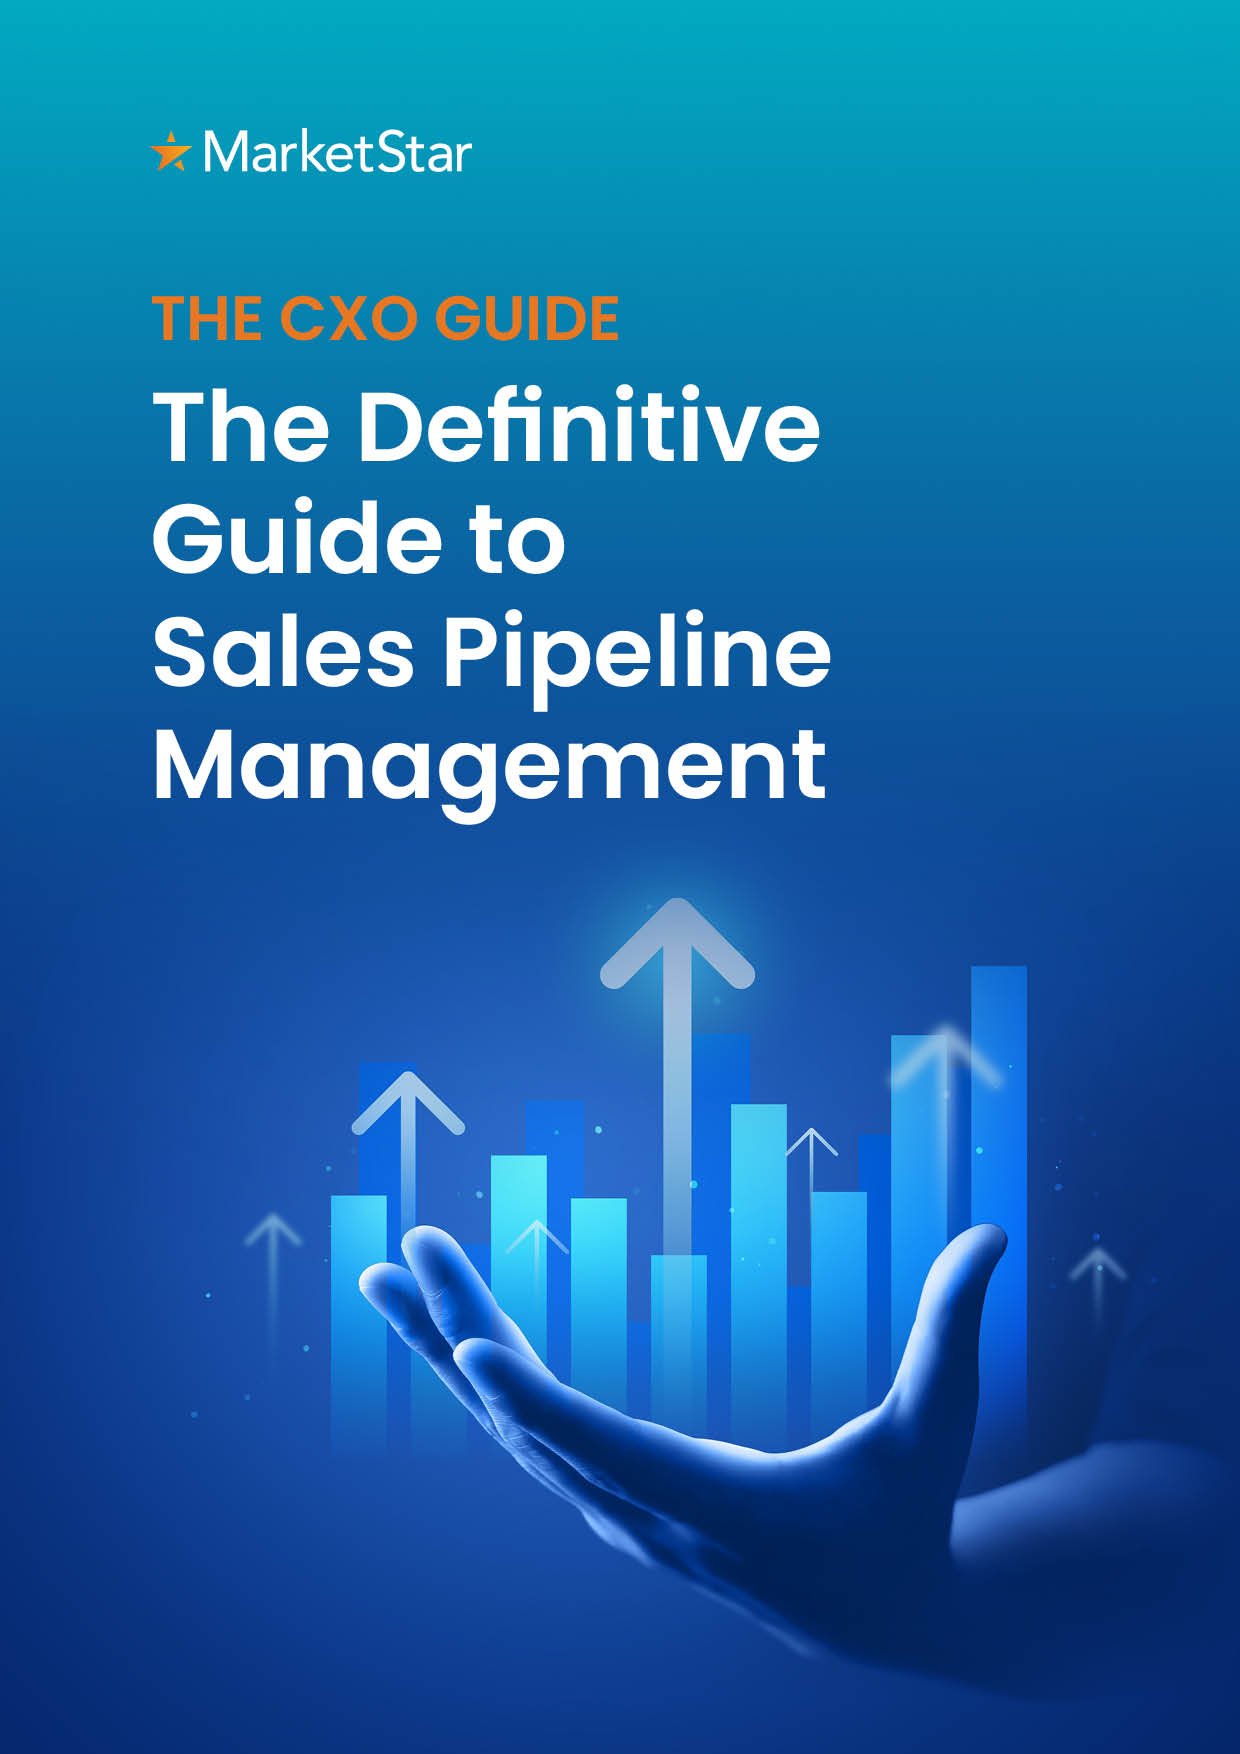 CXO_Guide_The Definitive Guide to Sales Pipeline Management